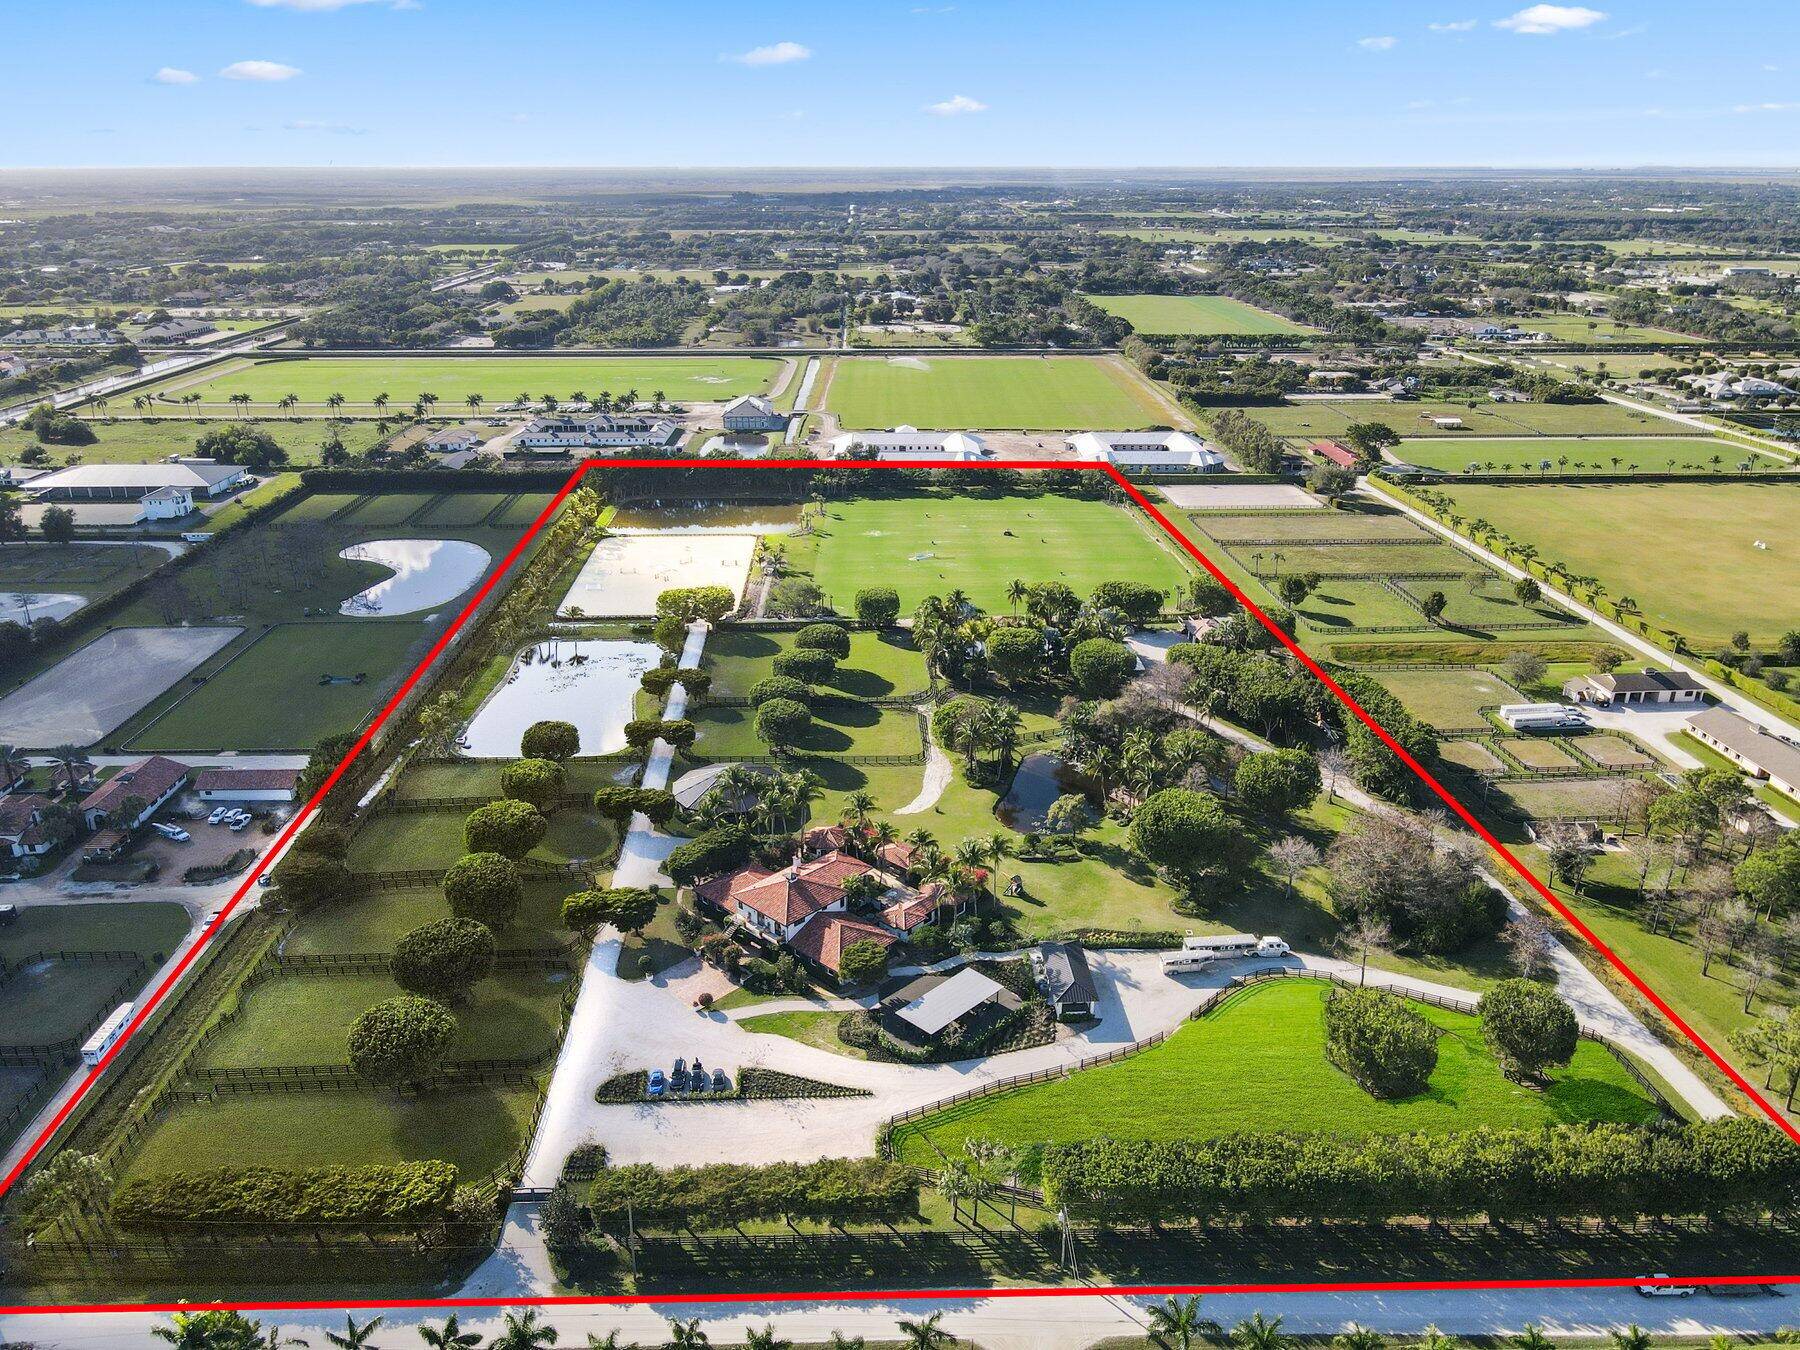 Stunning 21 acre Equestrian Compound located in the heart of Wellington close to all world class horse show and polo venues.